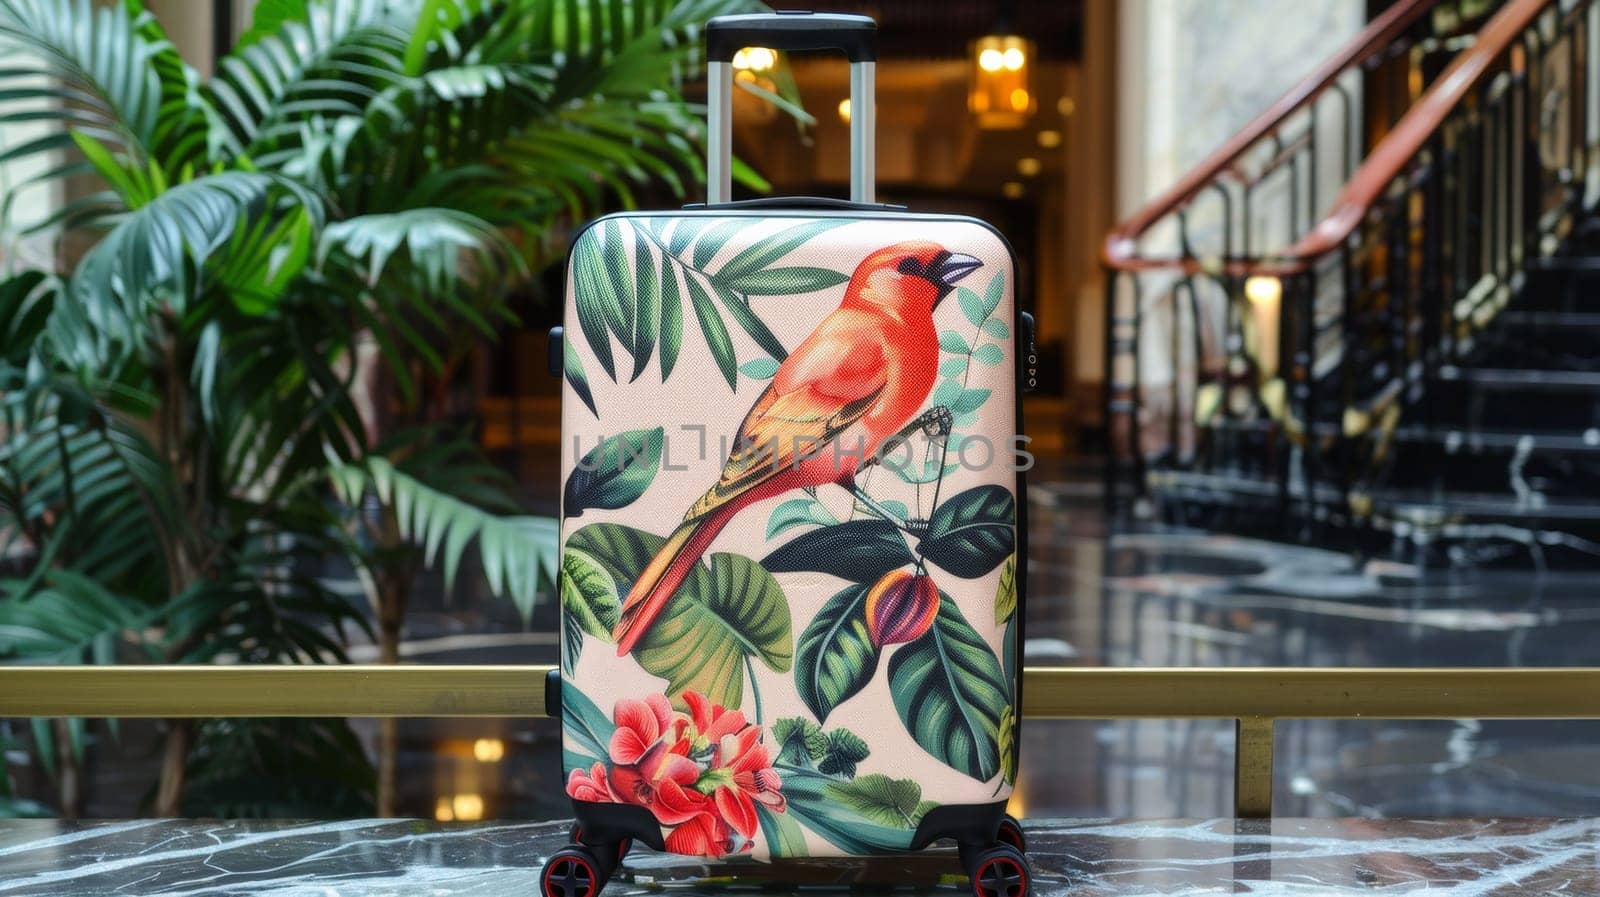 A colorful suitcase with a bird on it sitting in front of some plants